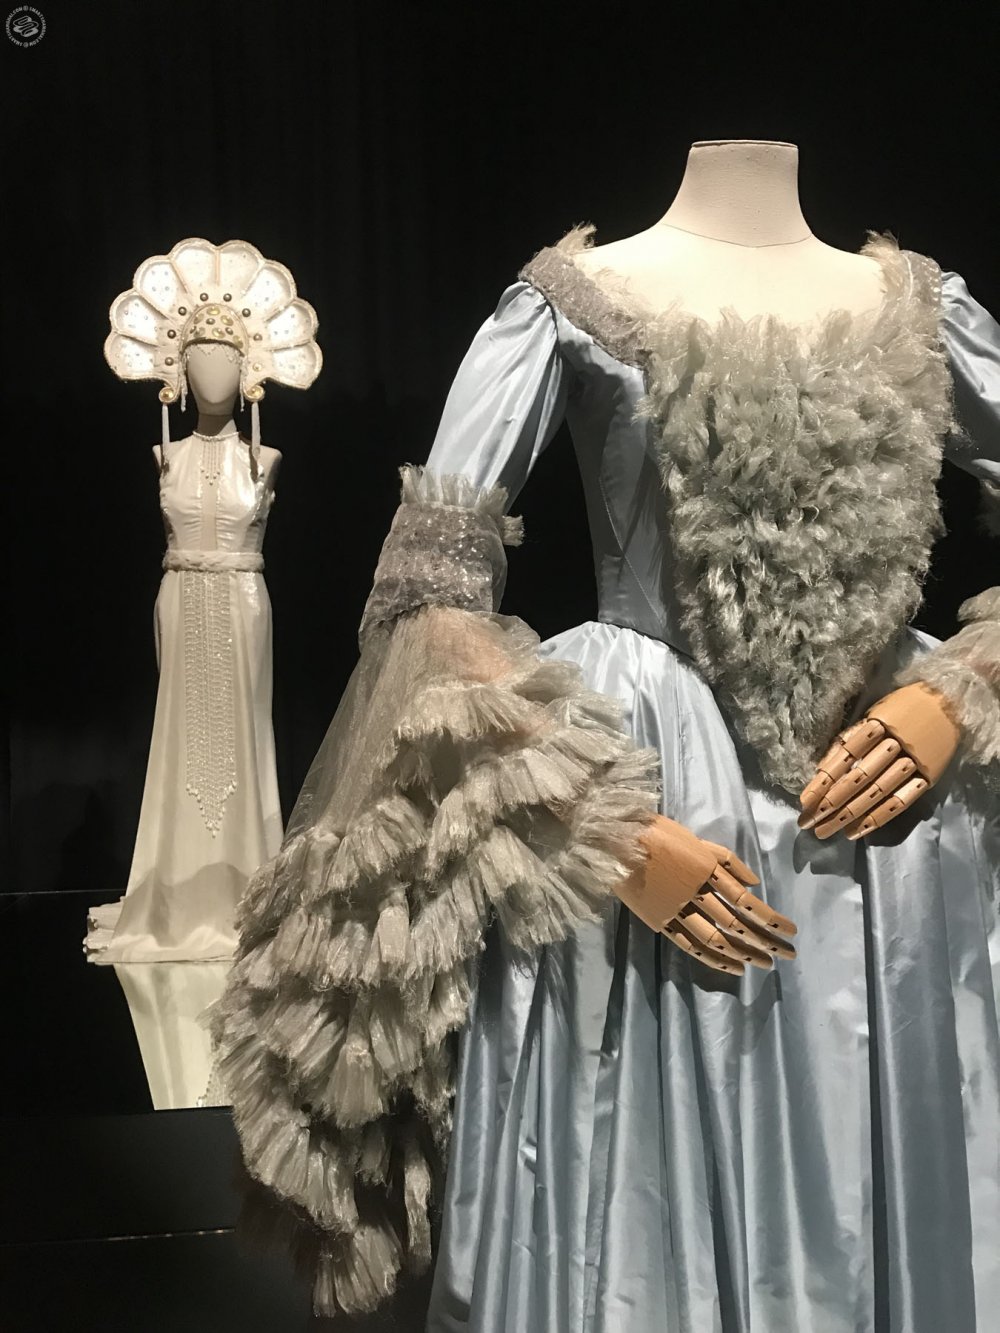 Beauty Changes: 100 Years of Italian Fashion and Costume